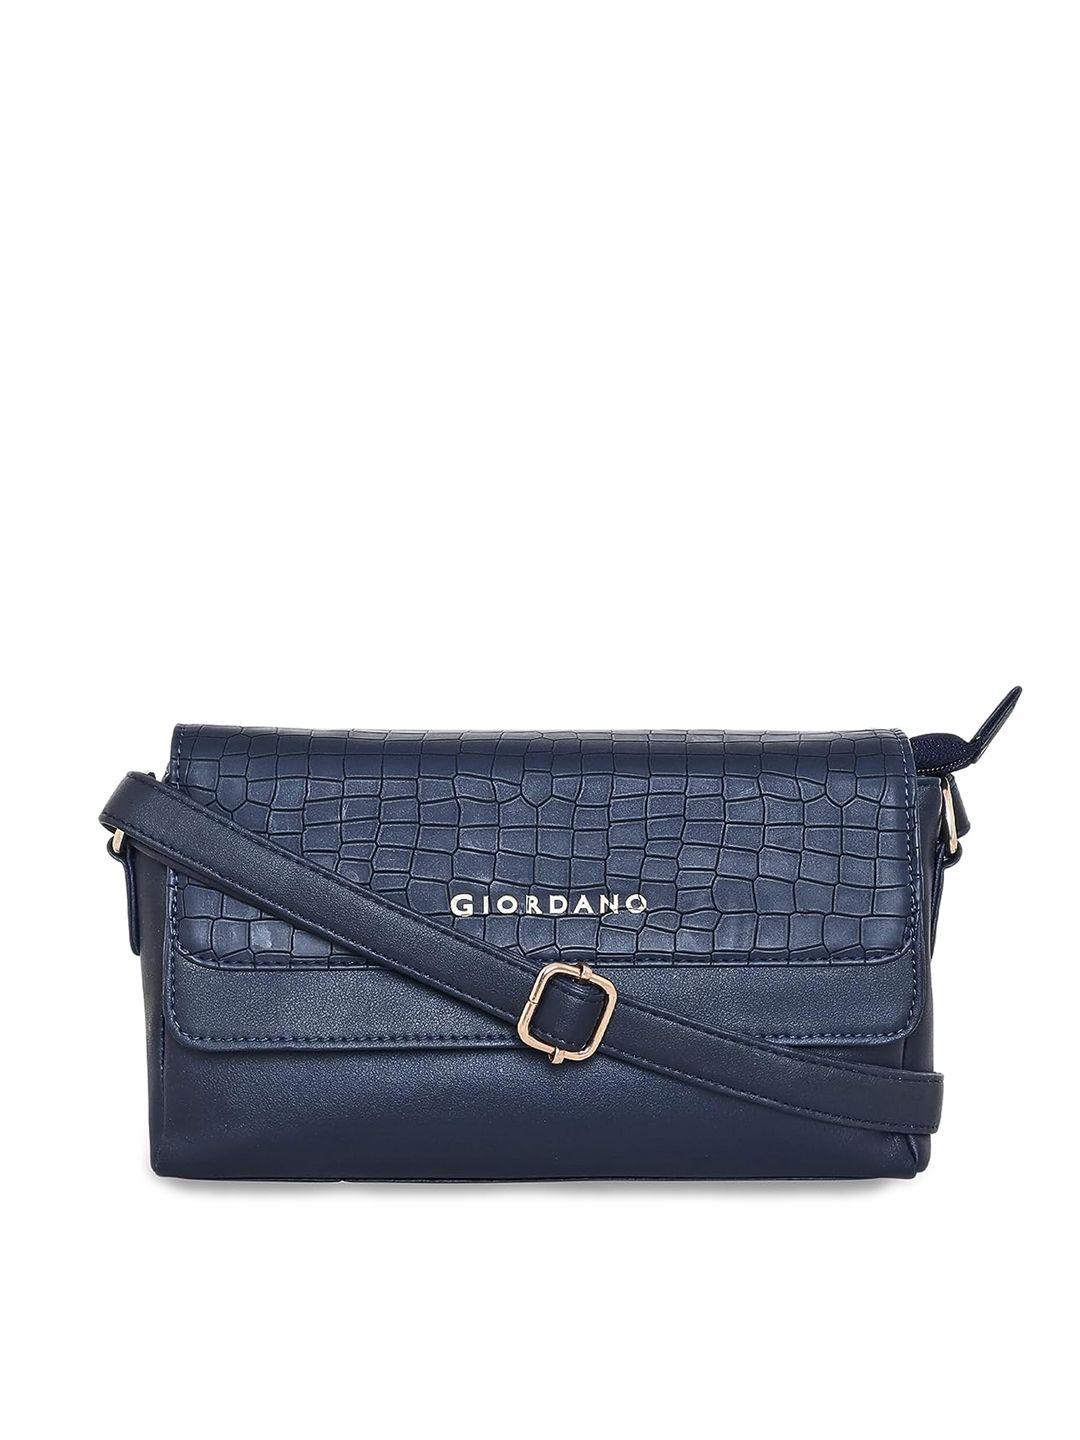 giordano textured structured sling bag